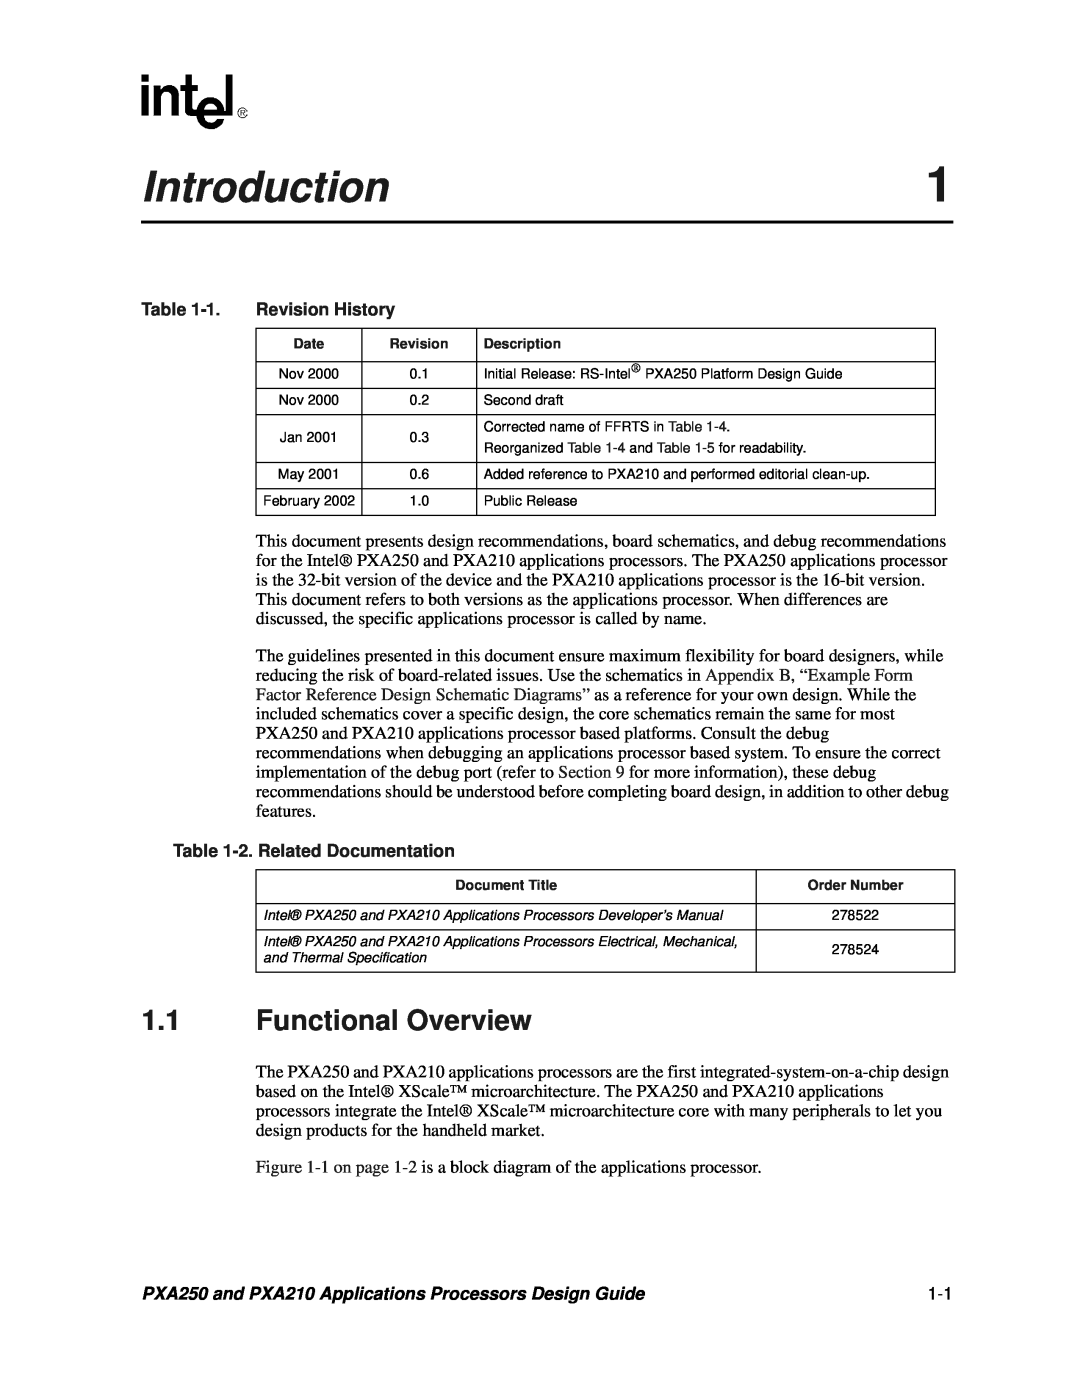 Intel PXA250 and PXA210 manual Introduction, Functional Overview, Revision History, 2. Related Documentation 